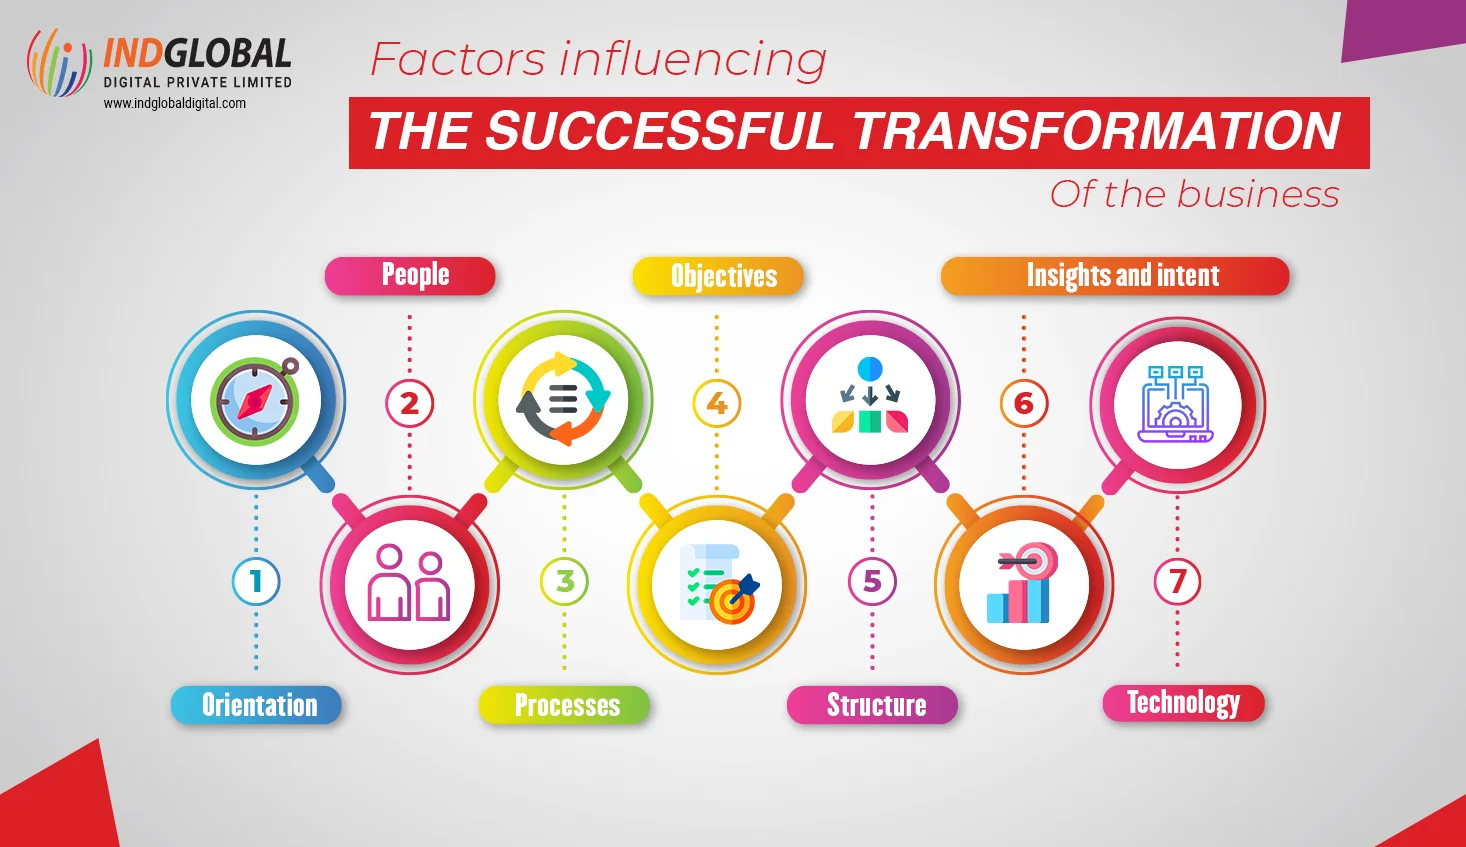 Factors influencing the successful transformation of the business